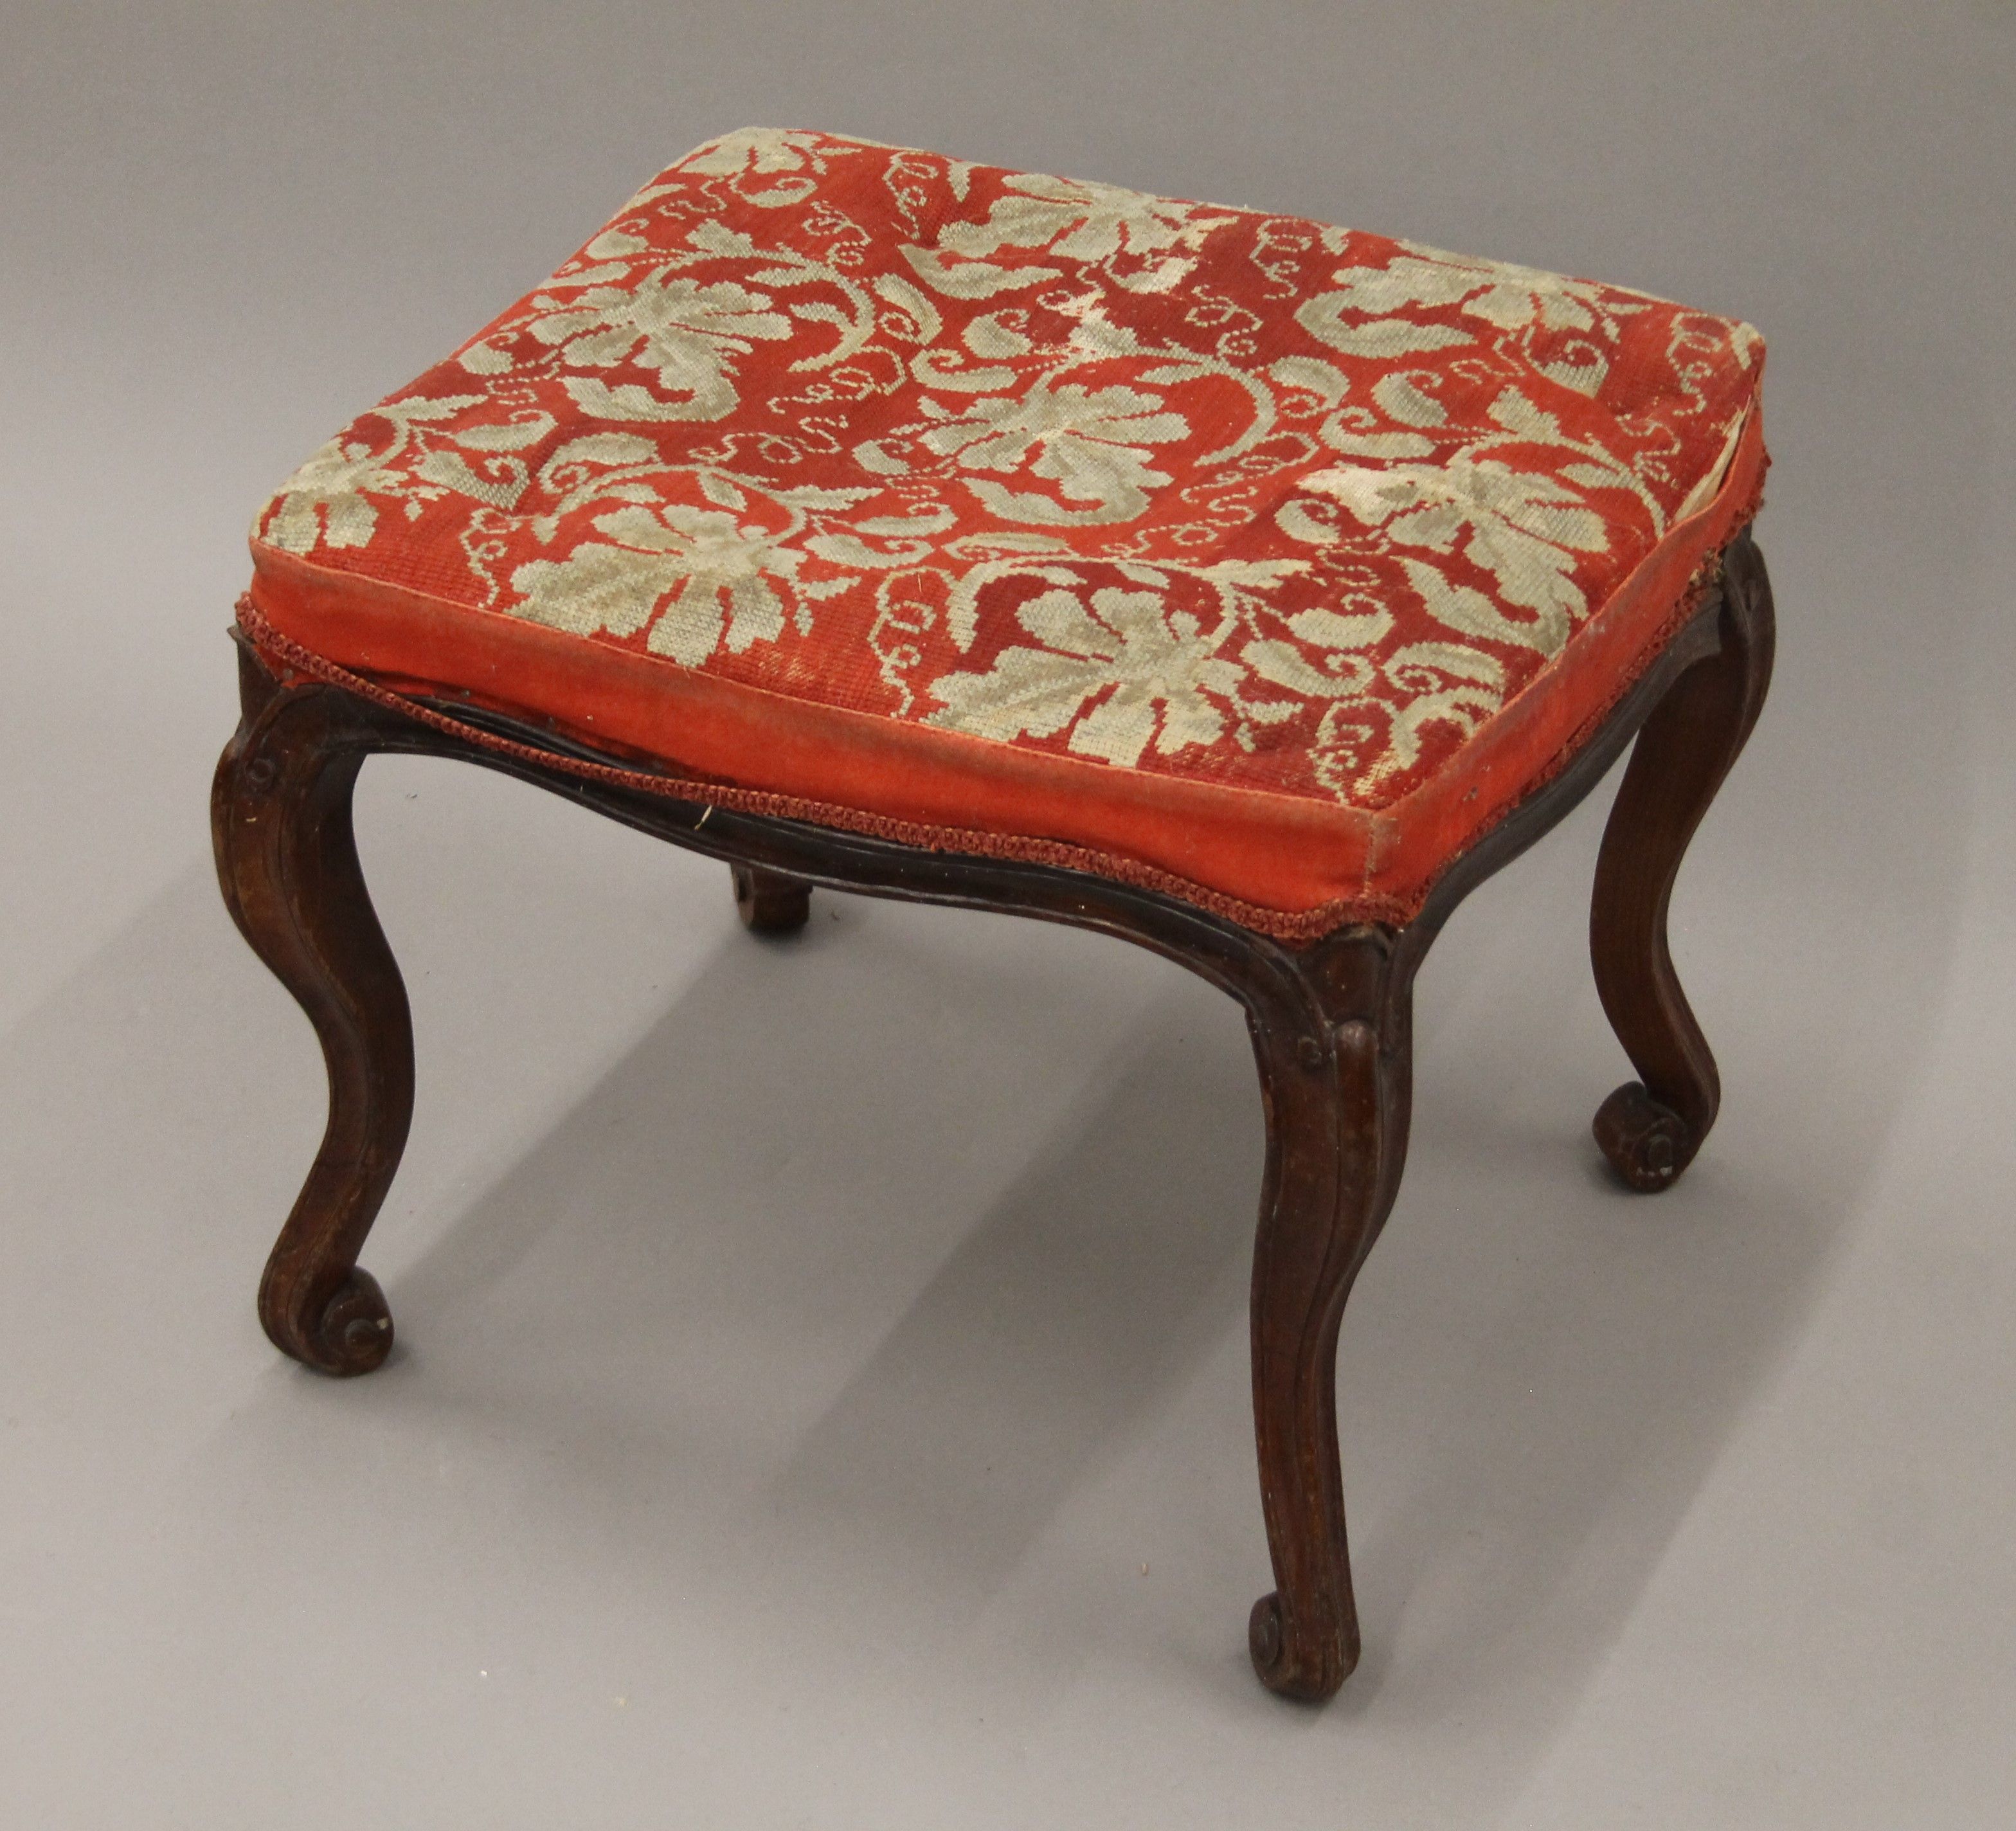 A 19th century tapestry-covered stool. 54 cm long. - Image 2 of 5